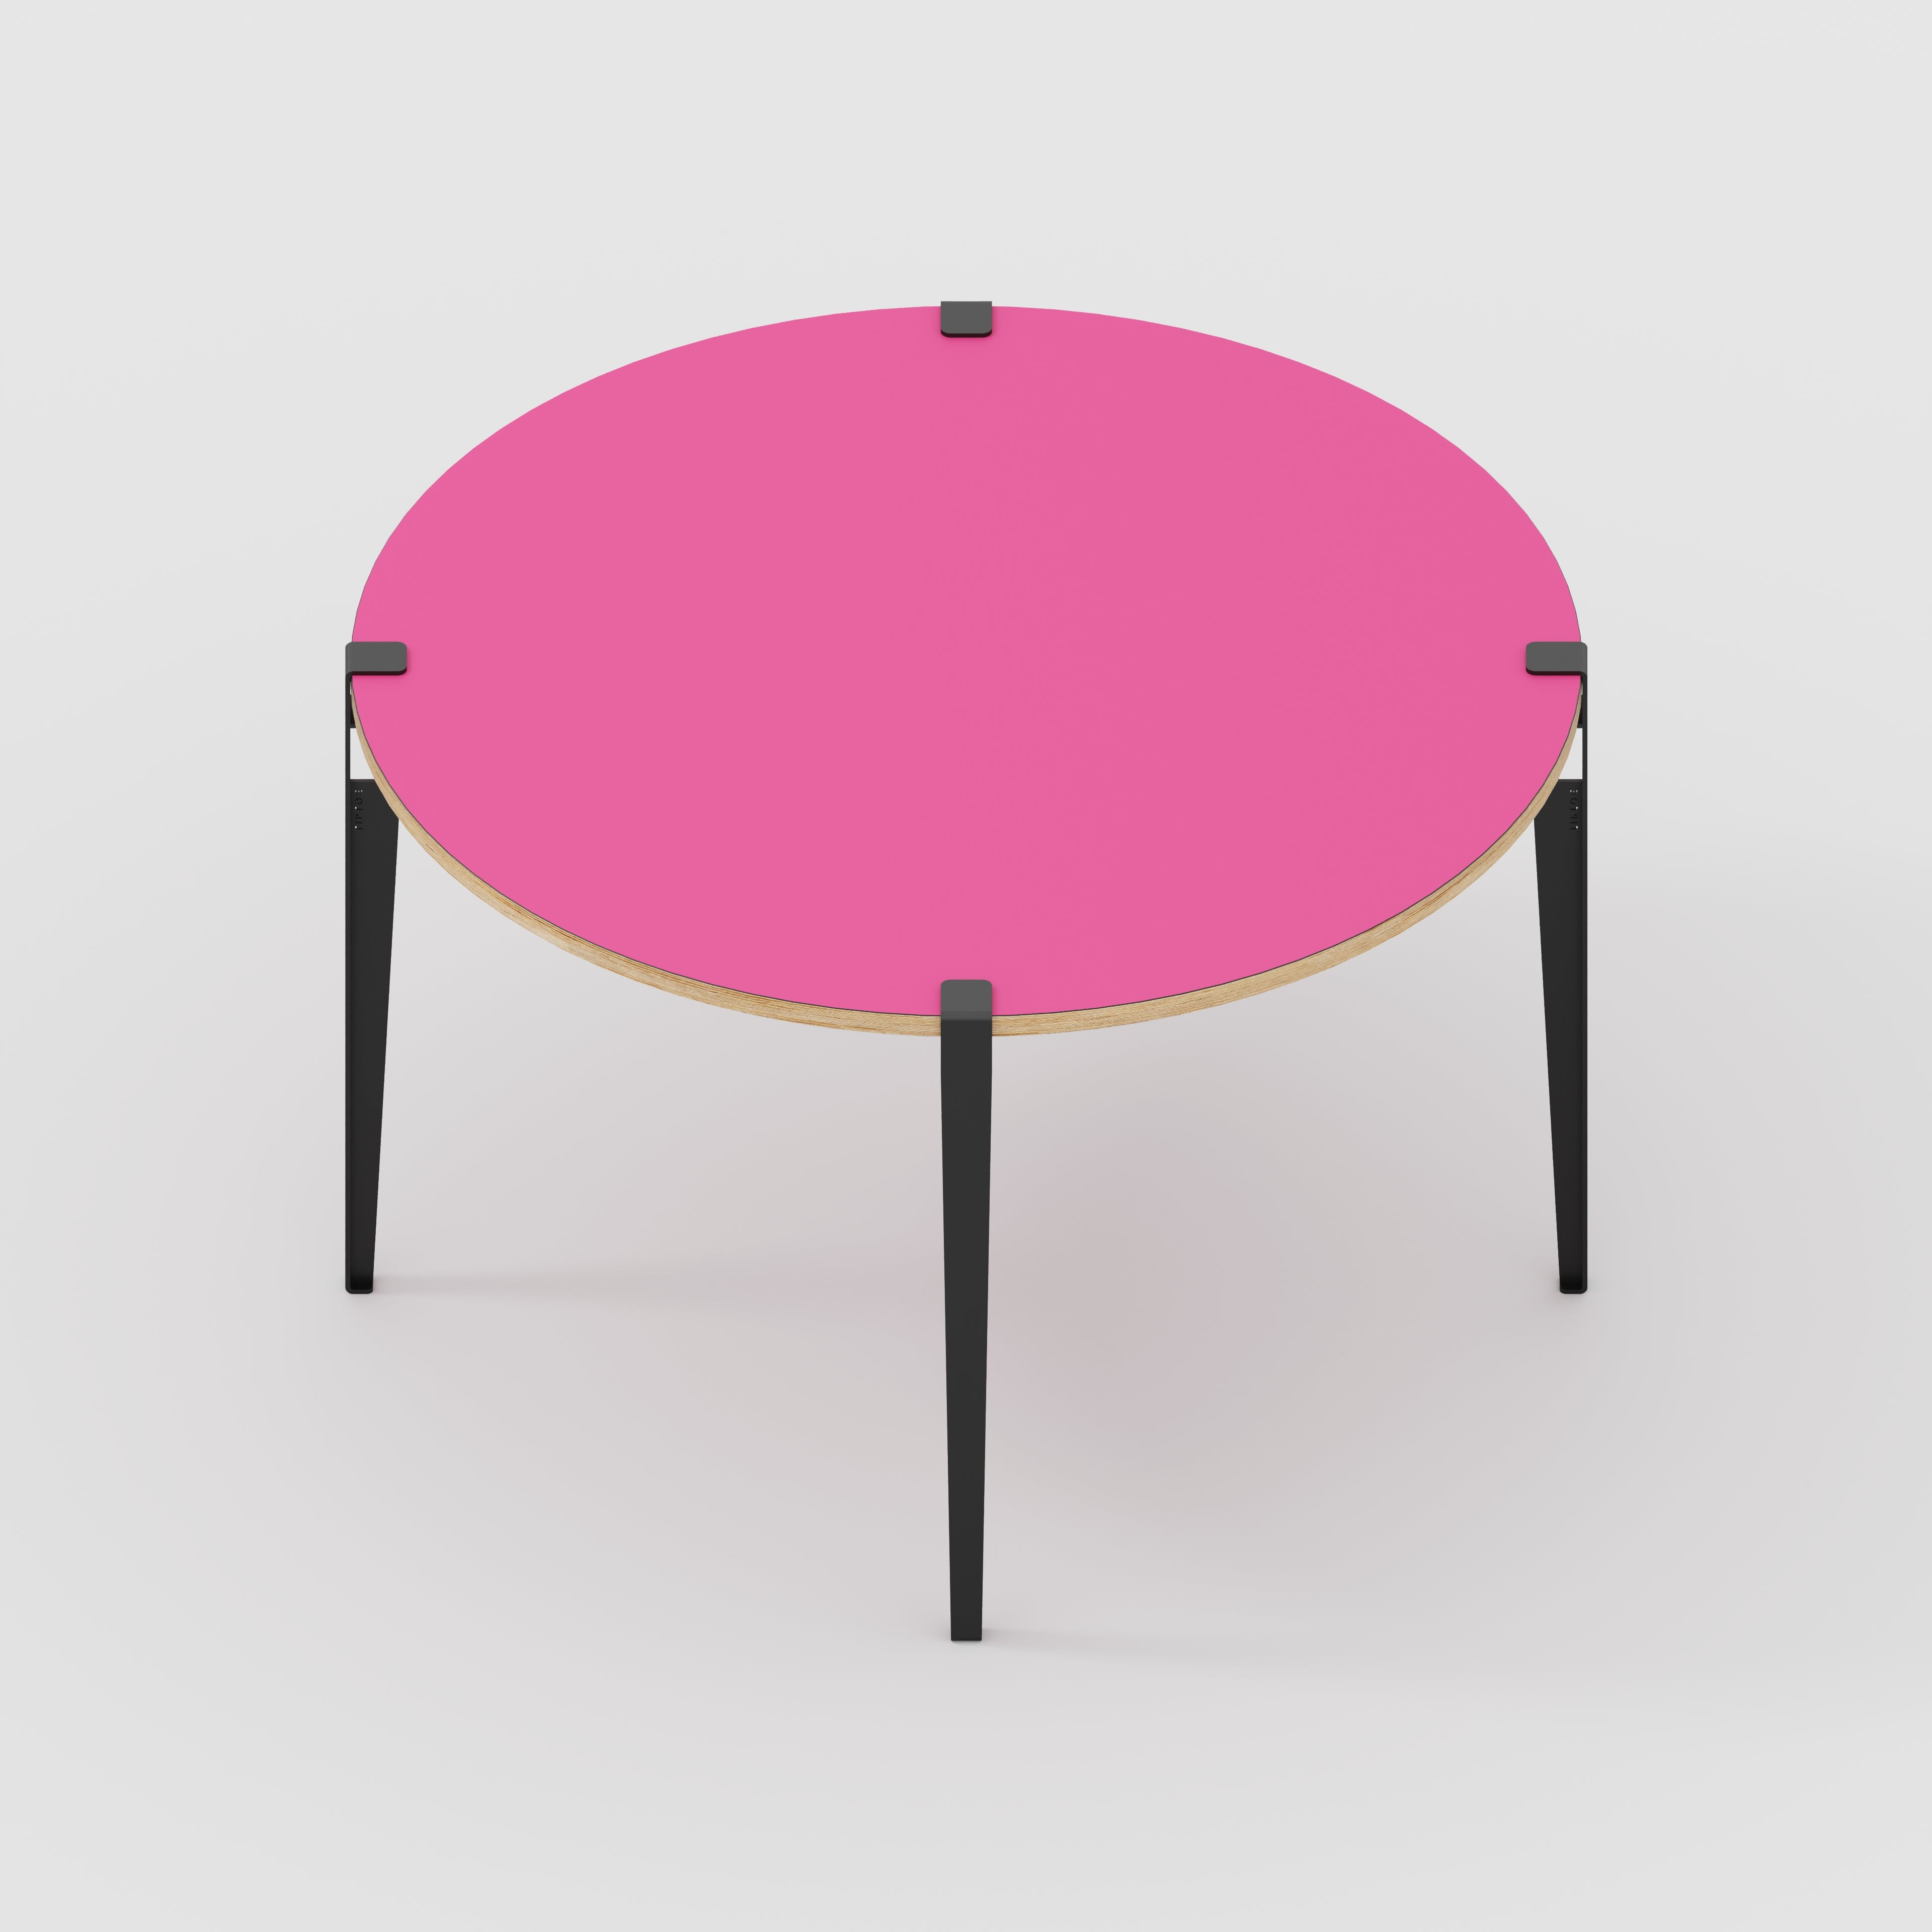 Round Table with Black Tiptoe Legs - Formica Juicy Pink - 1200(dia) x 750(h)